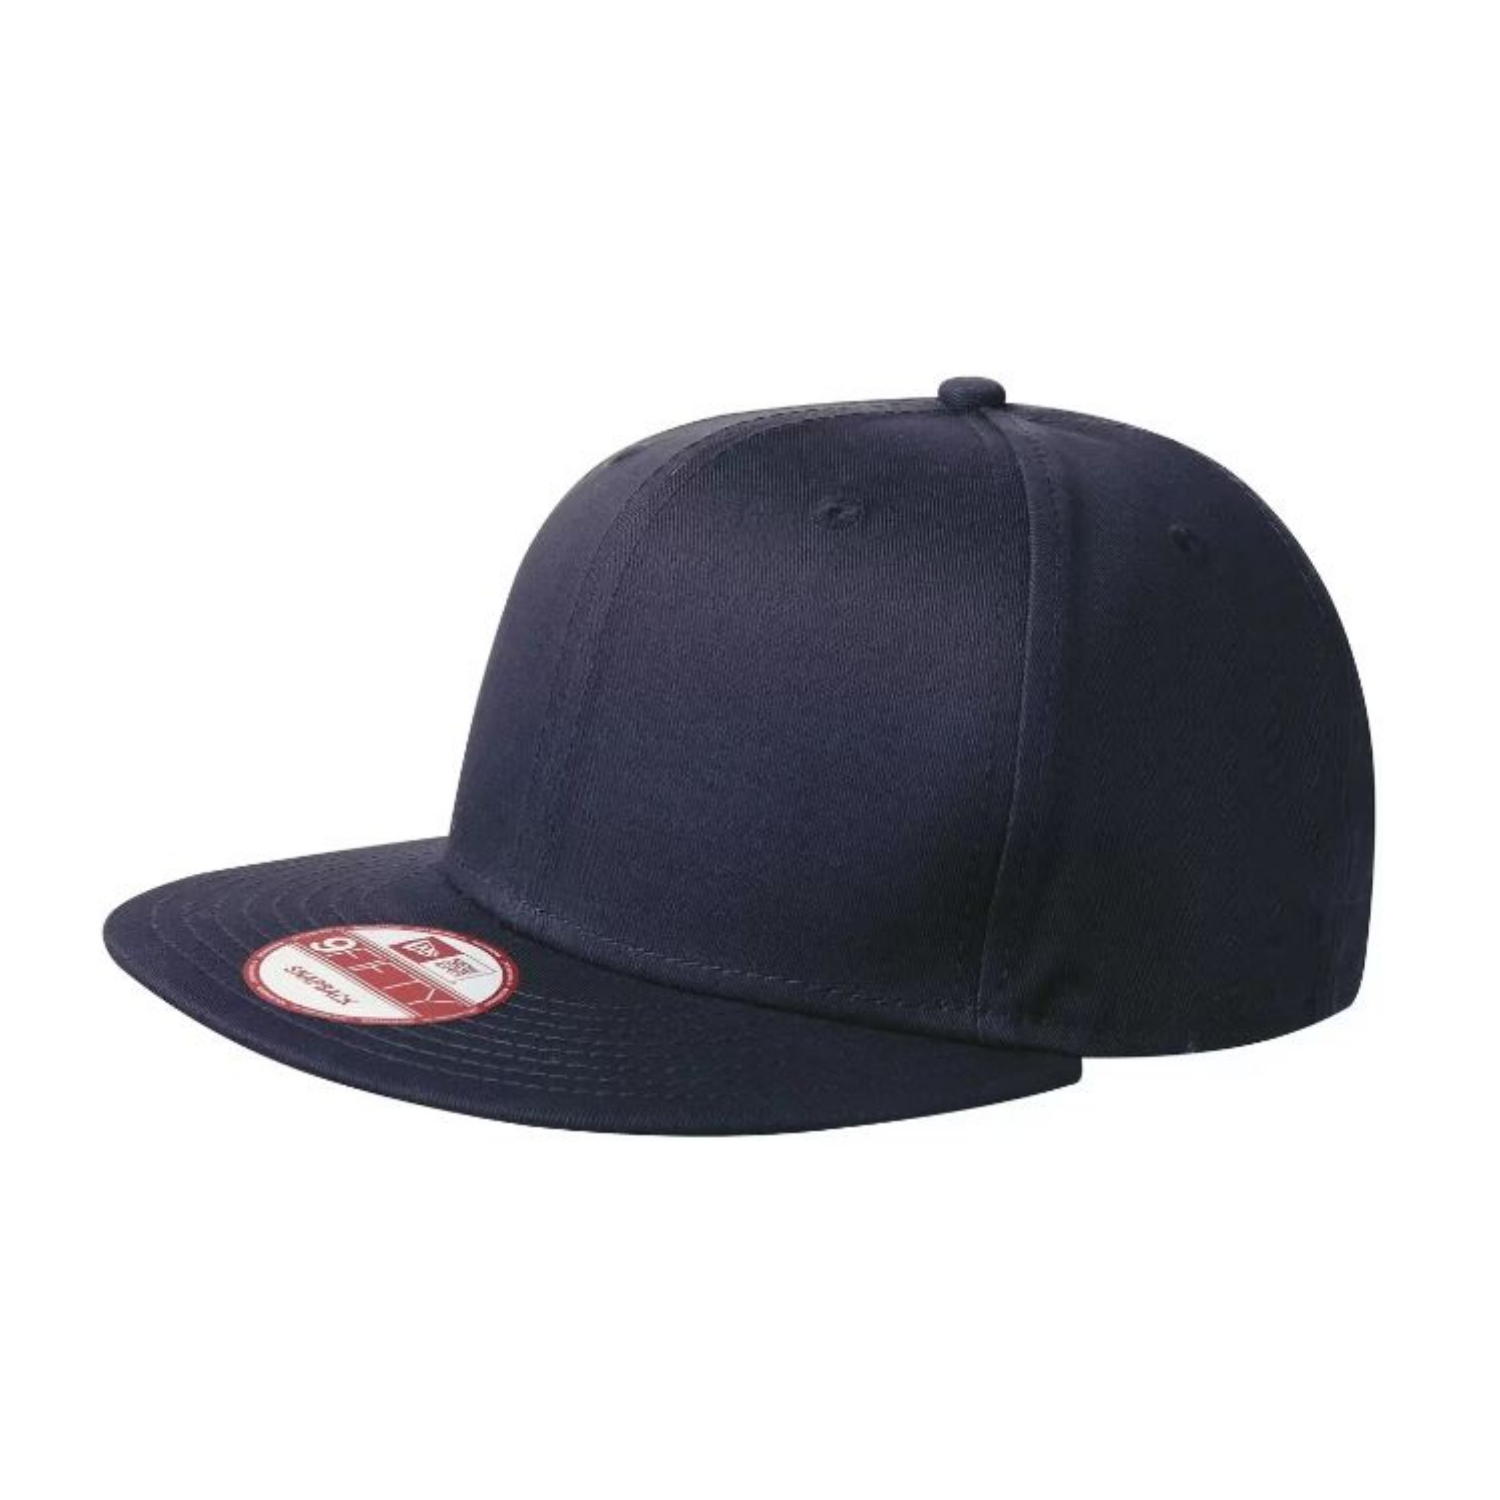 A blank baseball cap ready to be embroidered with your company logo or graphics.